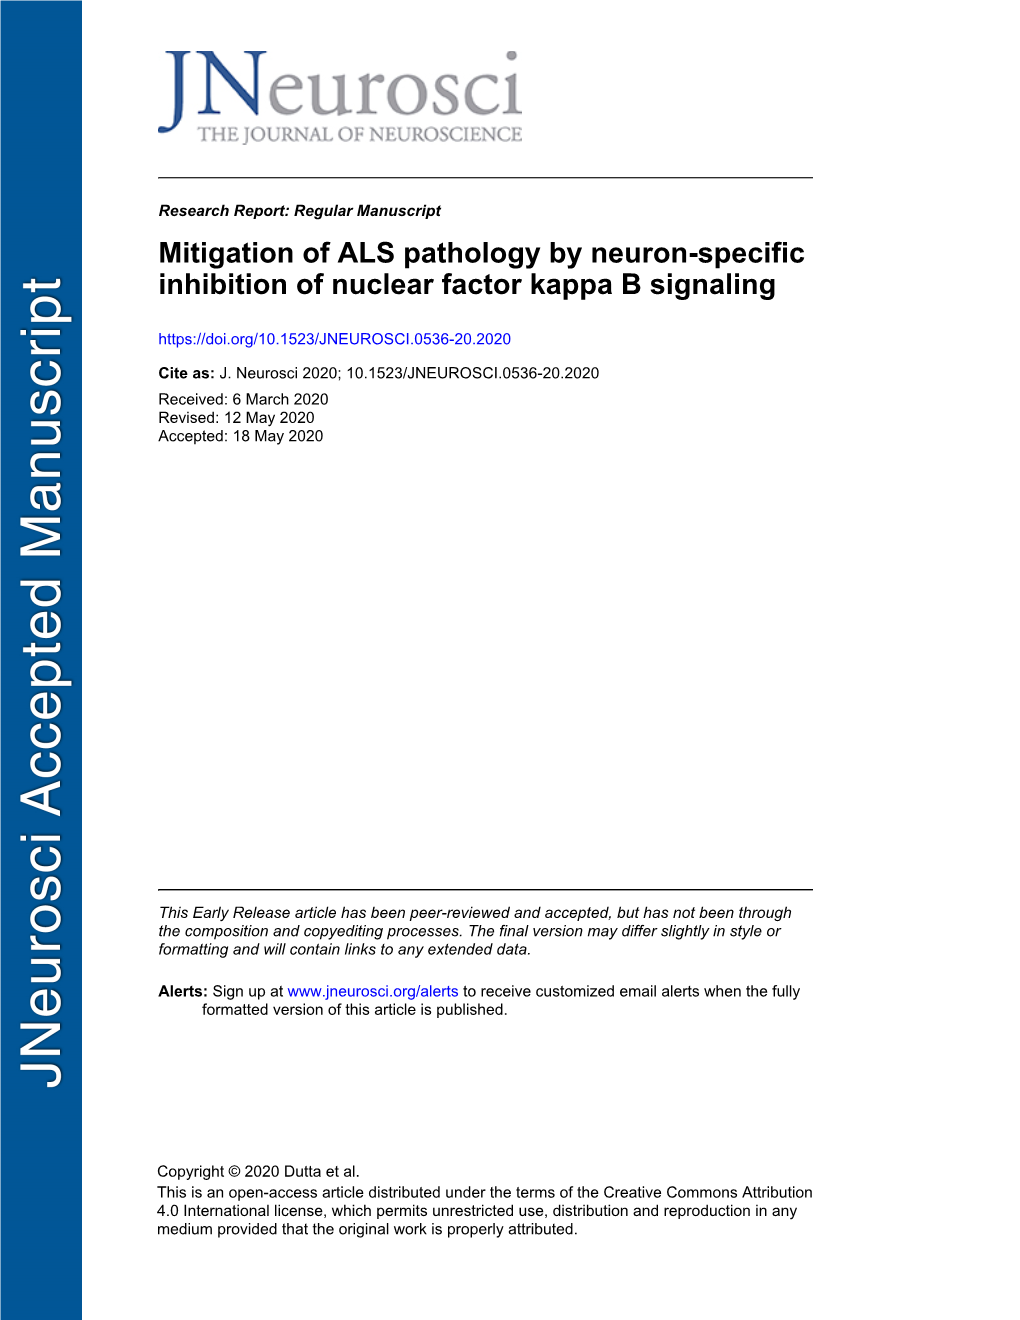 Mitigation of ALS Pathology by Neuron-Specific Inhibition of Nuclear Factor Kappa B Signaling